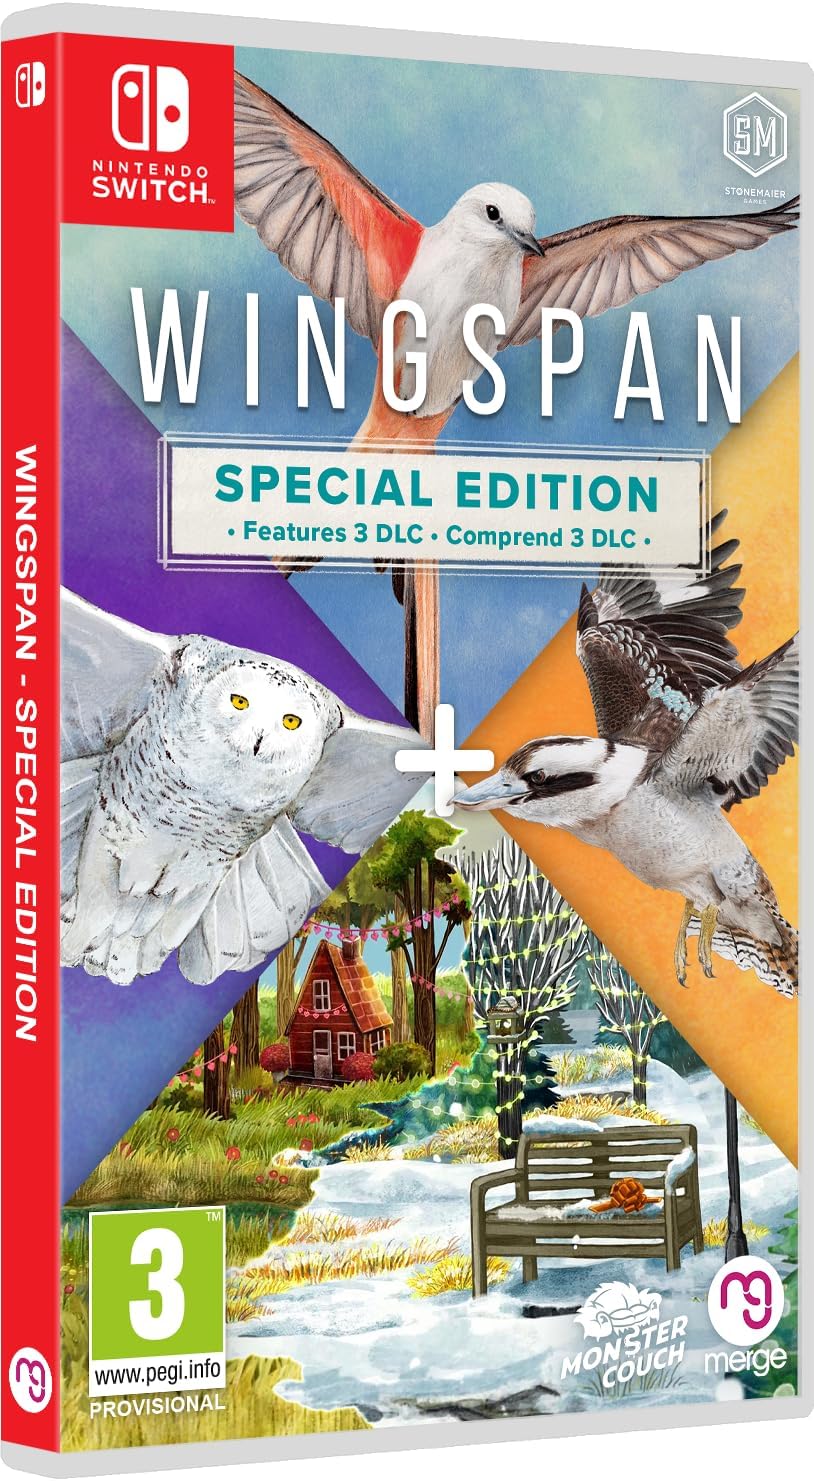 EAN : 5060264379712 - Wingspan Special Edition